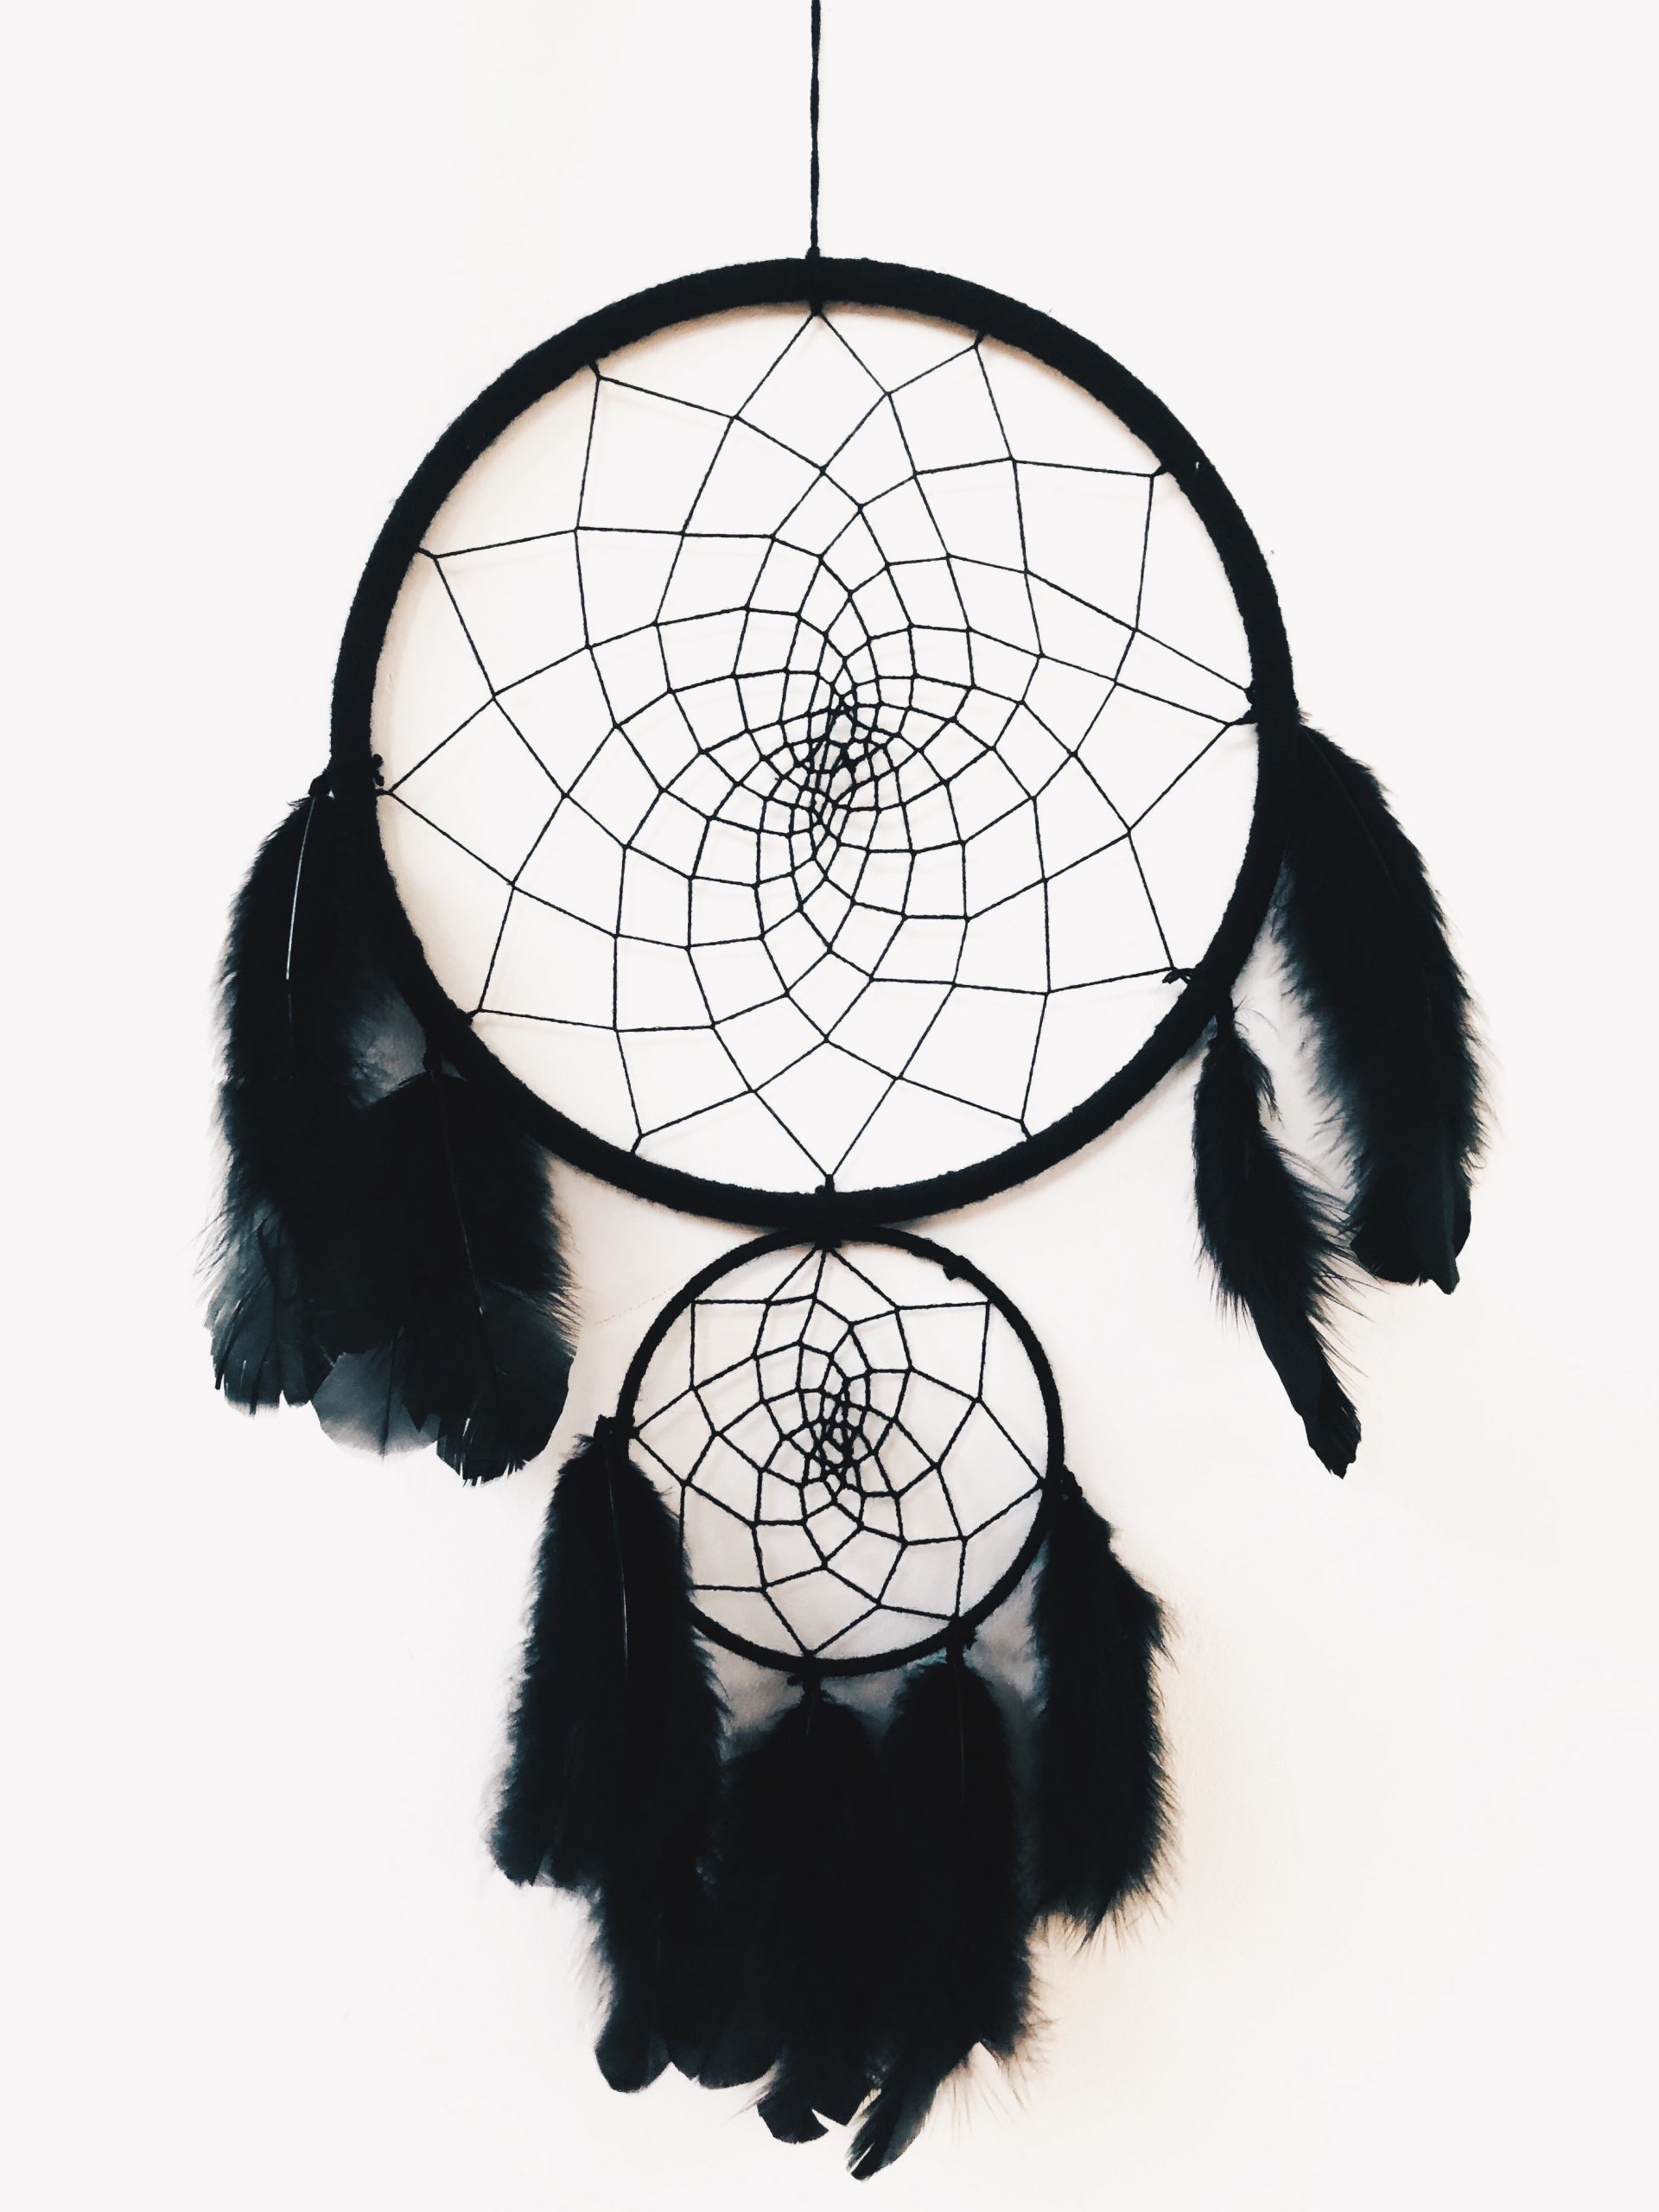 How to Activate a Dreamcatcher